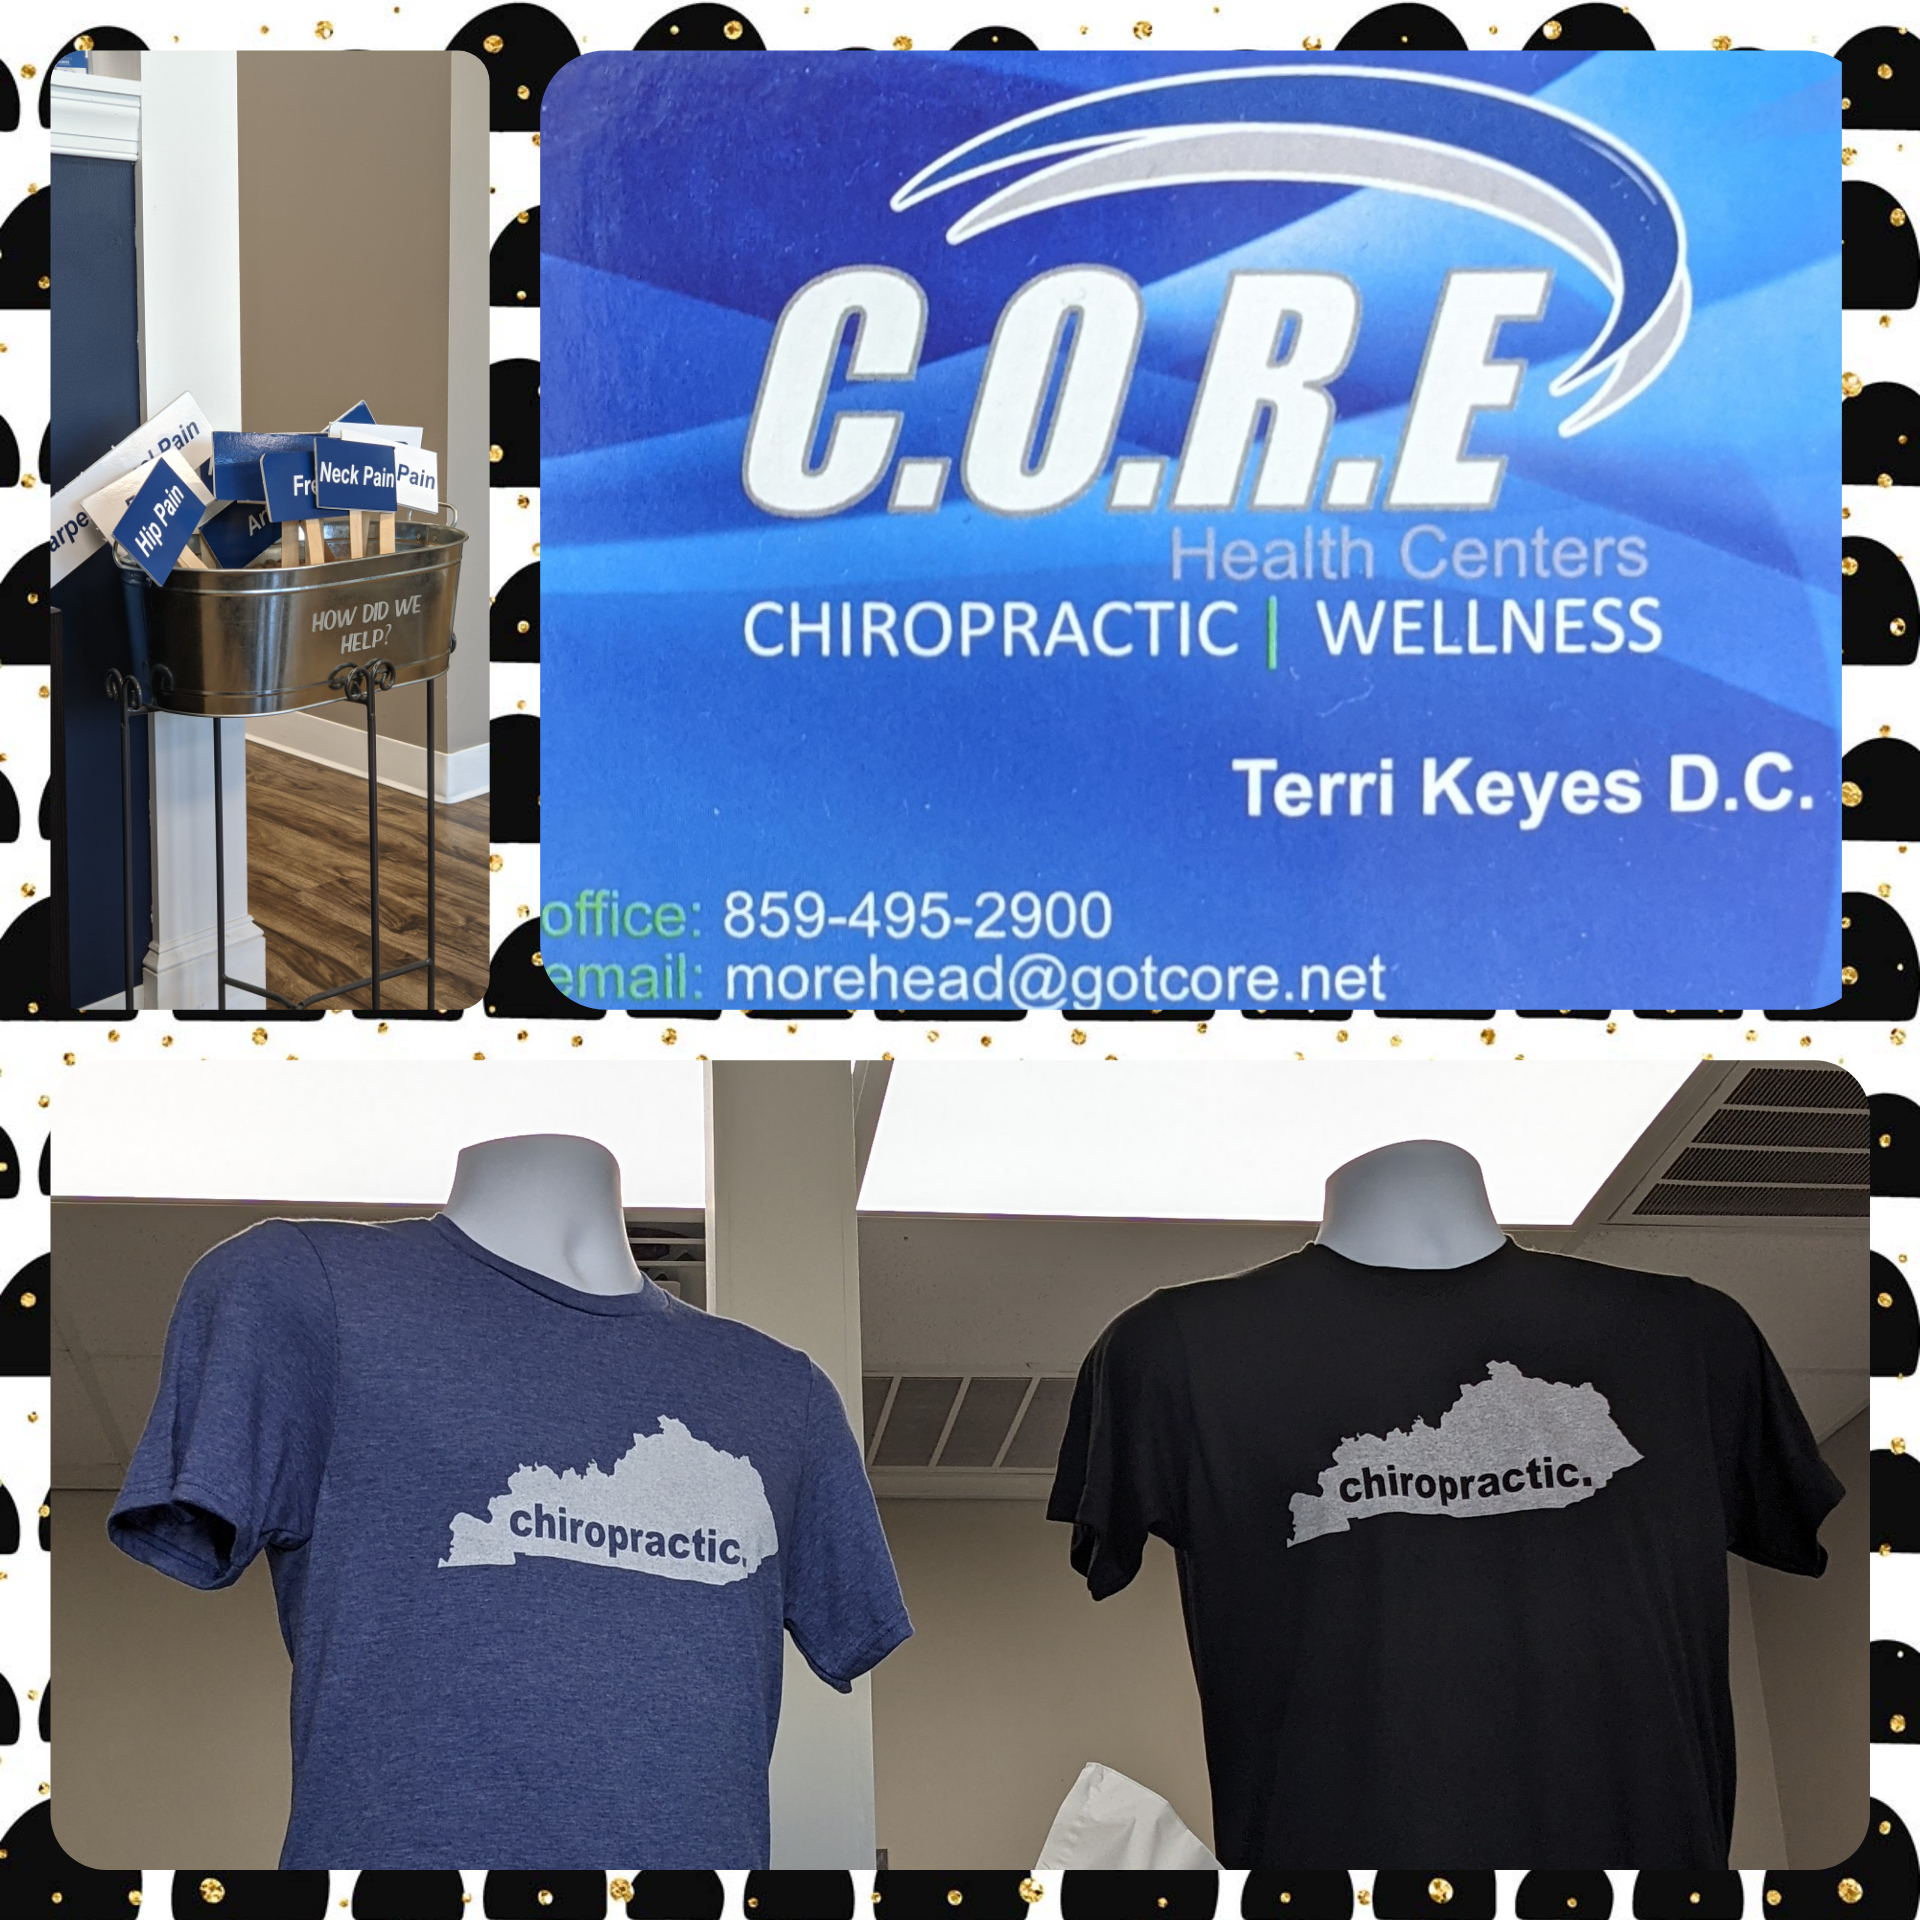 CORE Health Centers - Chiropractic and Wellness 220 C Kroger Center Dr, Morehead Kentucky 40351